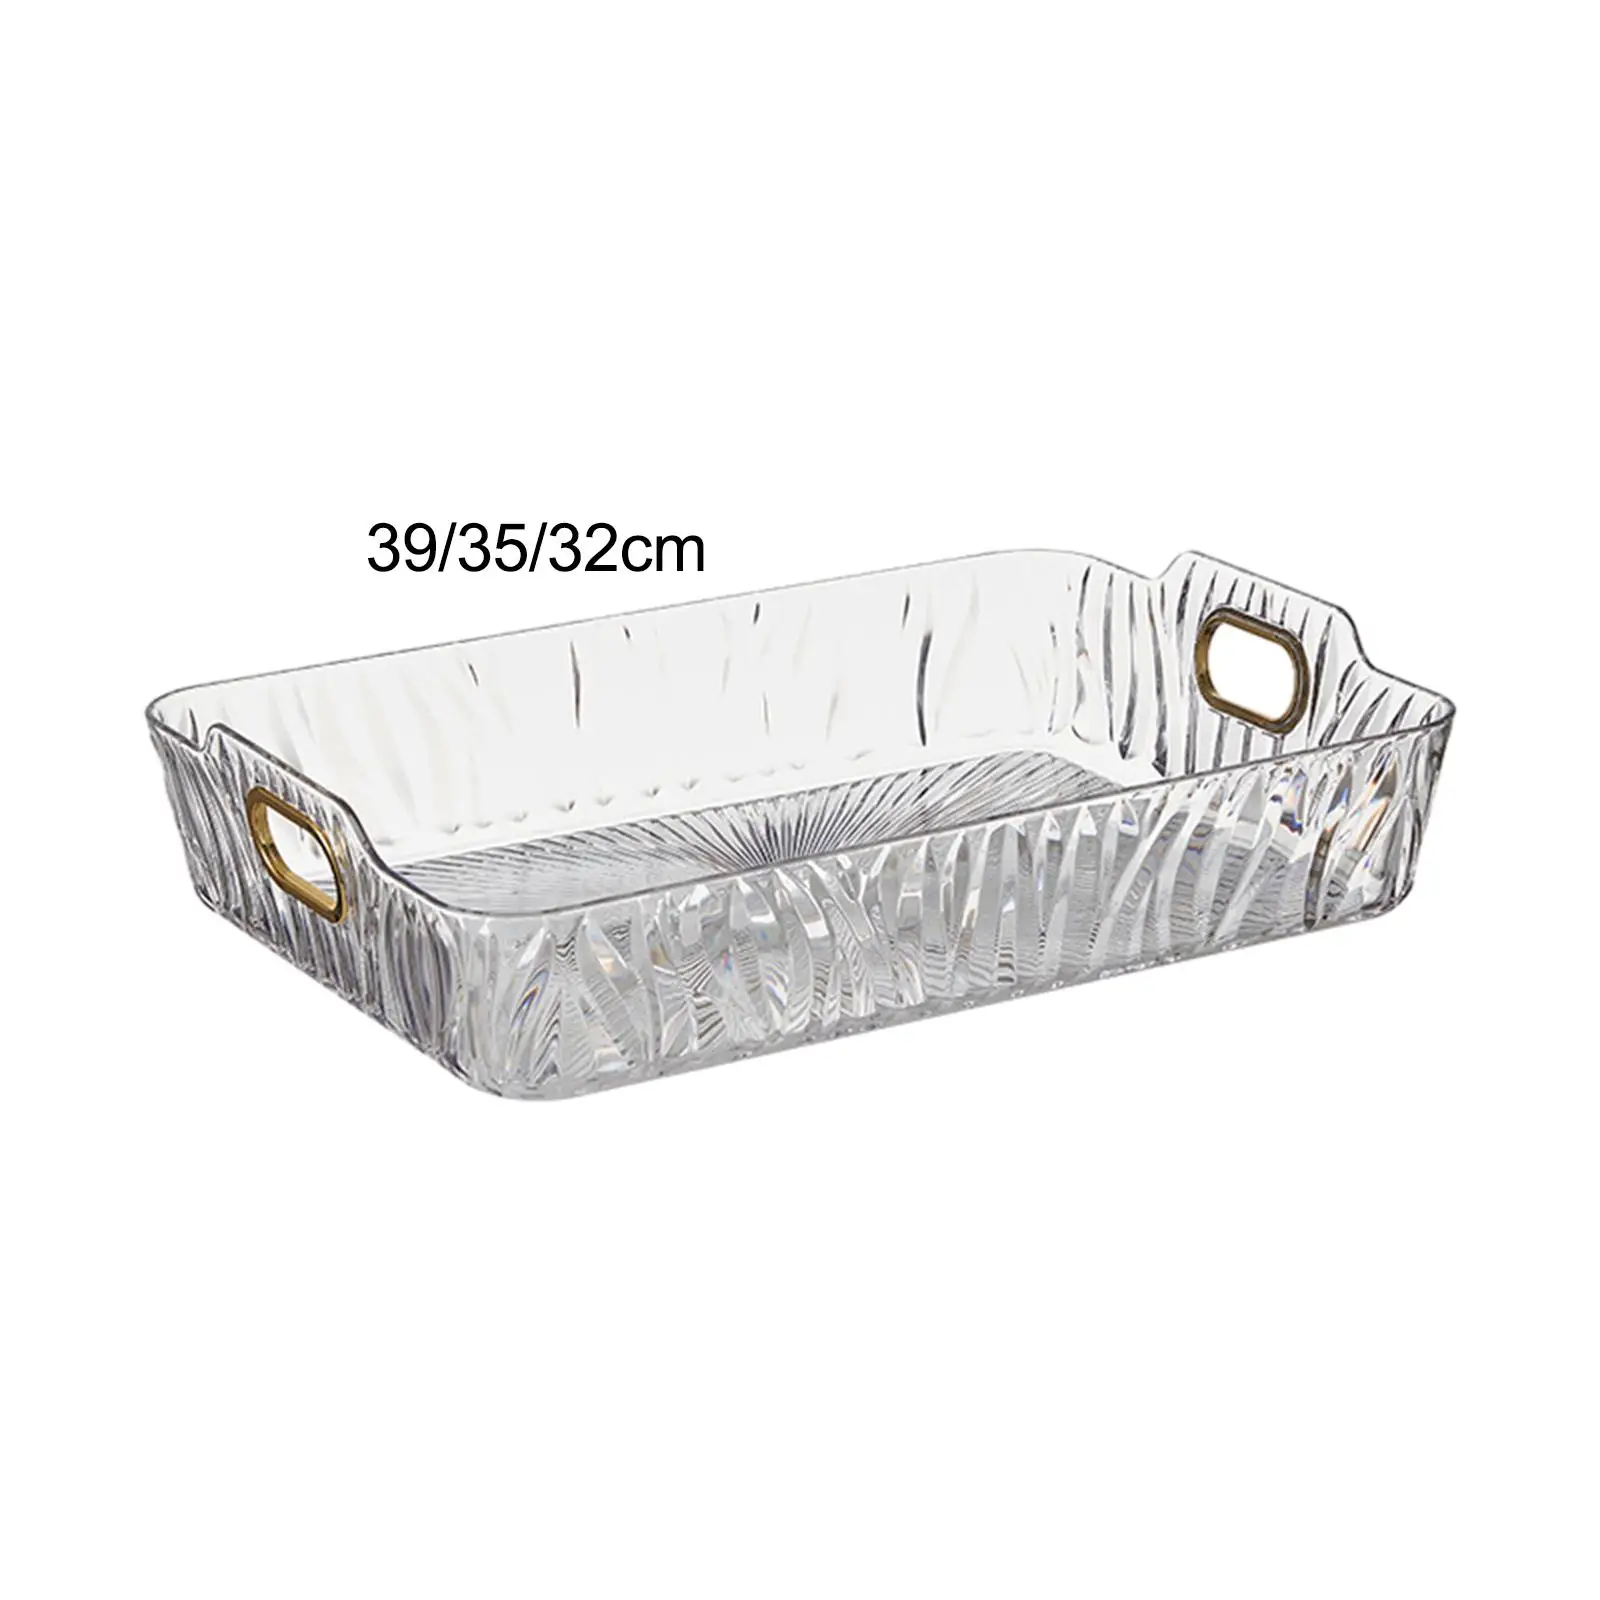 Rectangle Serving Tray Bathroom Vanity Organizer Fruit Plate for Kitchen Tabletop Living Room Bedroom Bathroom Candy Snacks Nuts